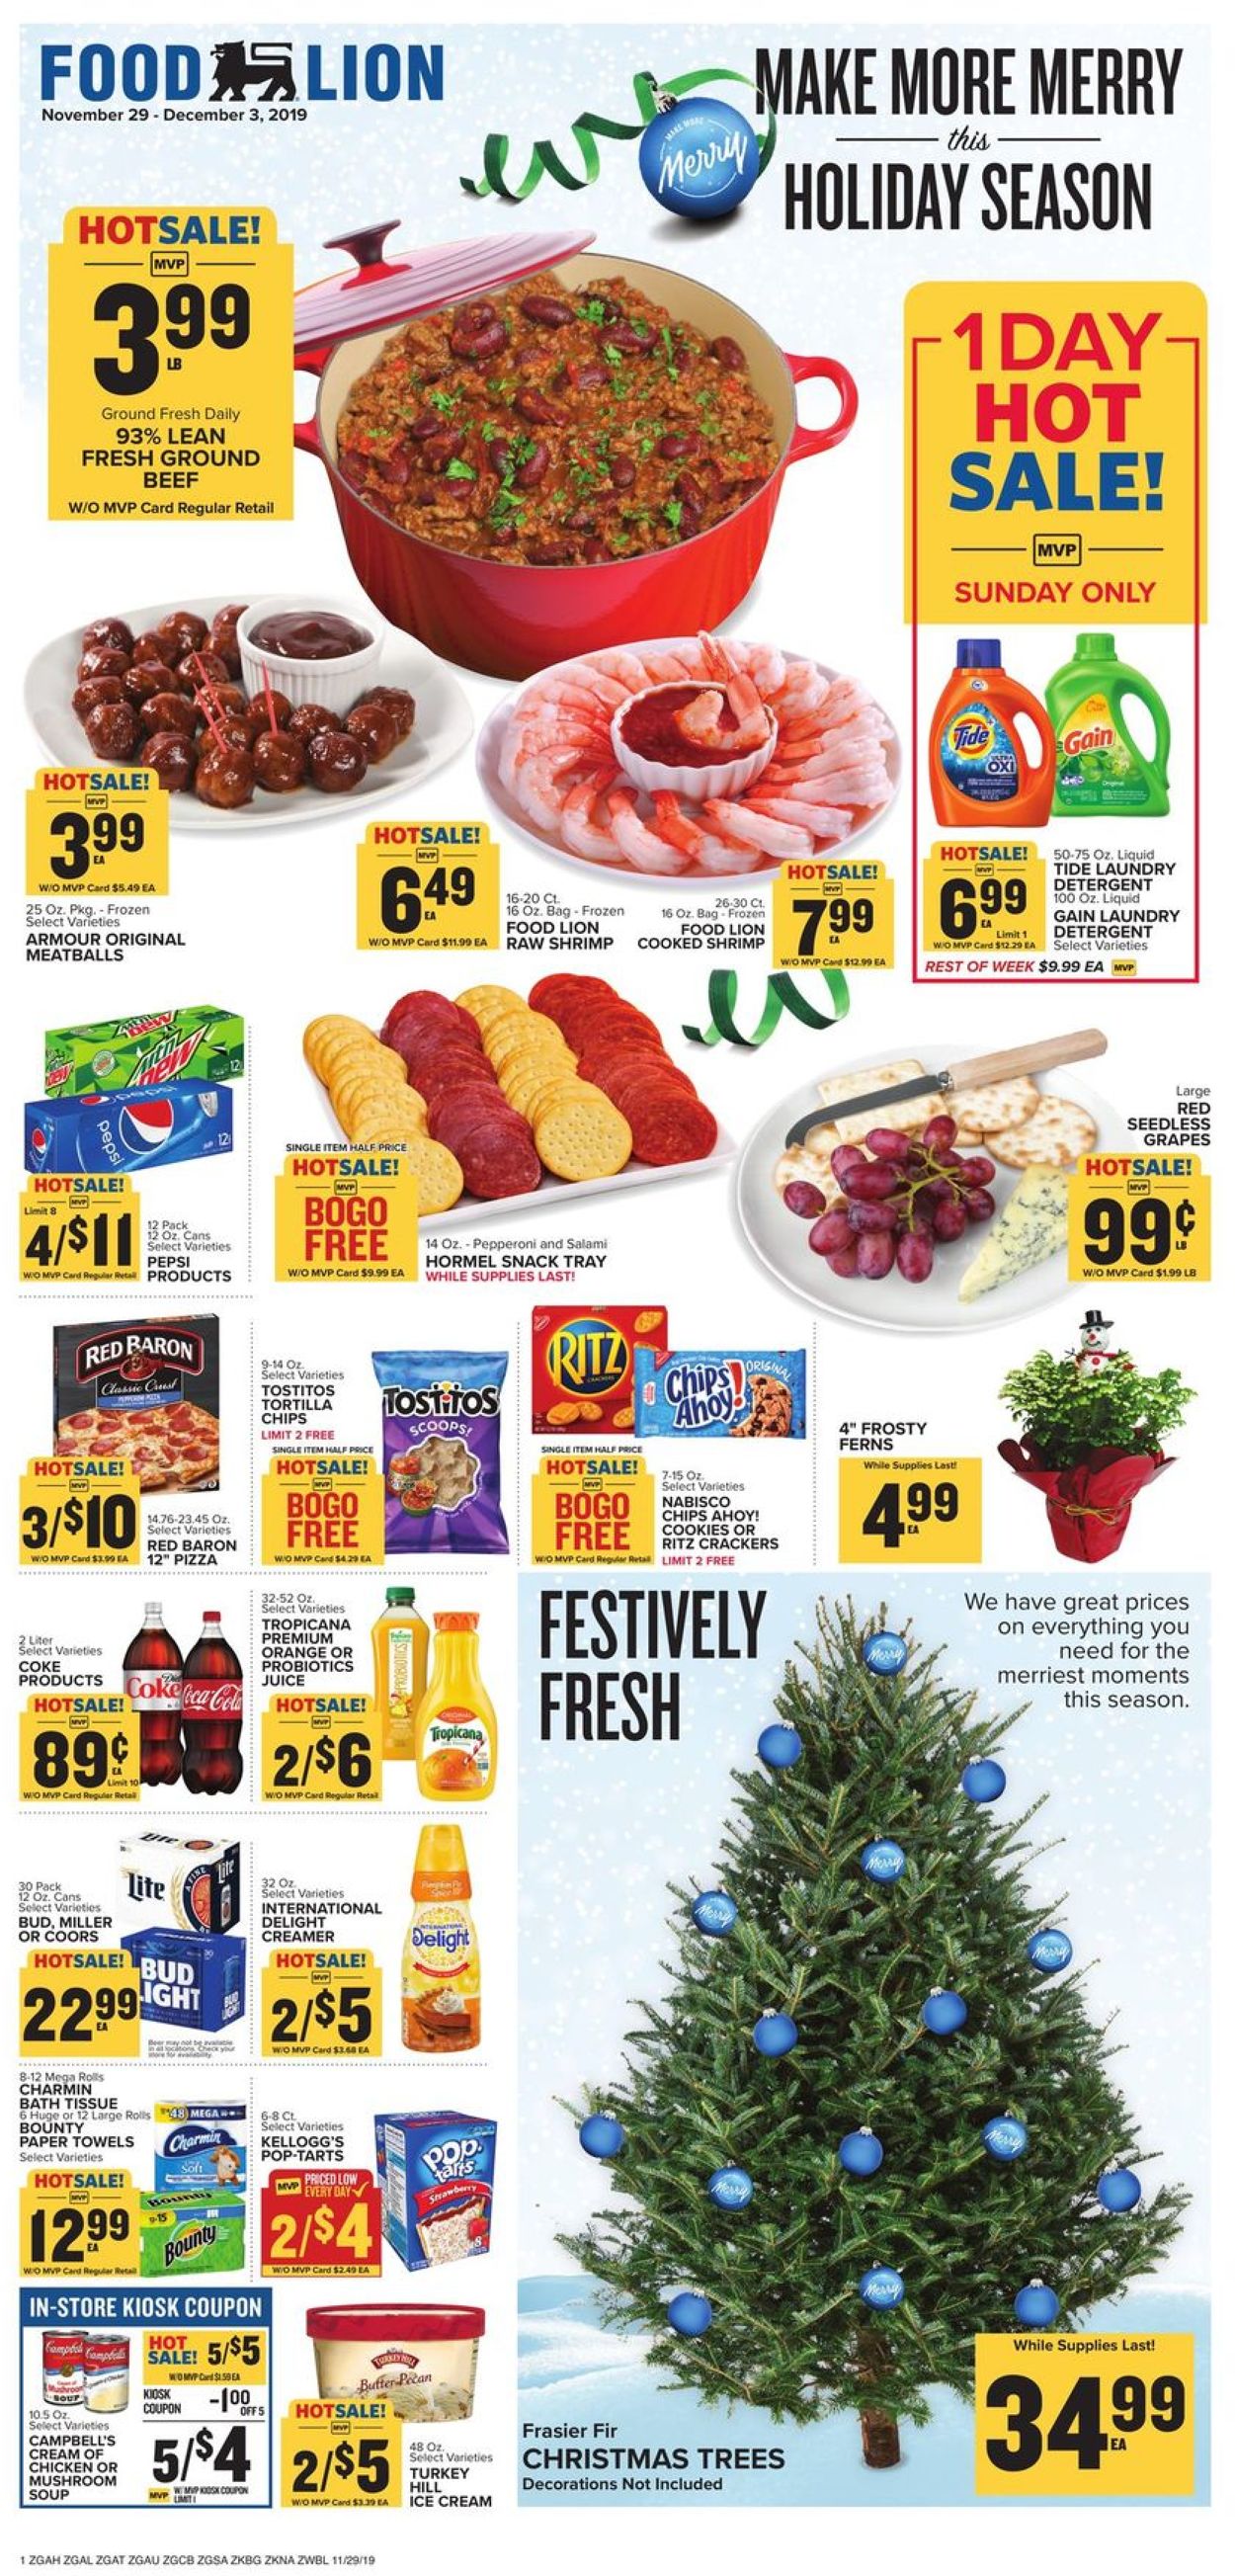 Food Lion - Holiday Ad 2019 Current weekly ad 11/29 - 12/03/2019 ...